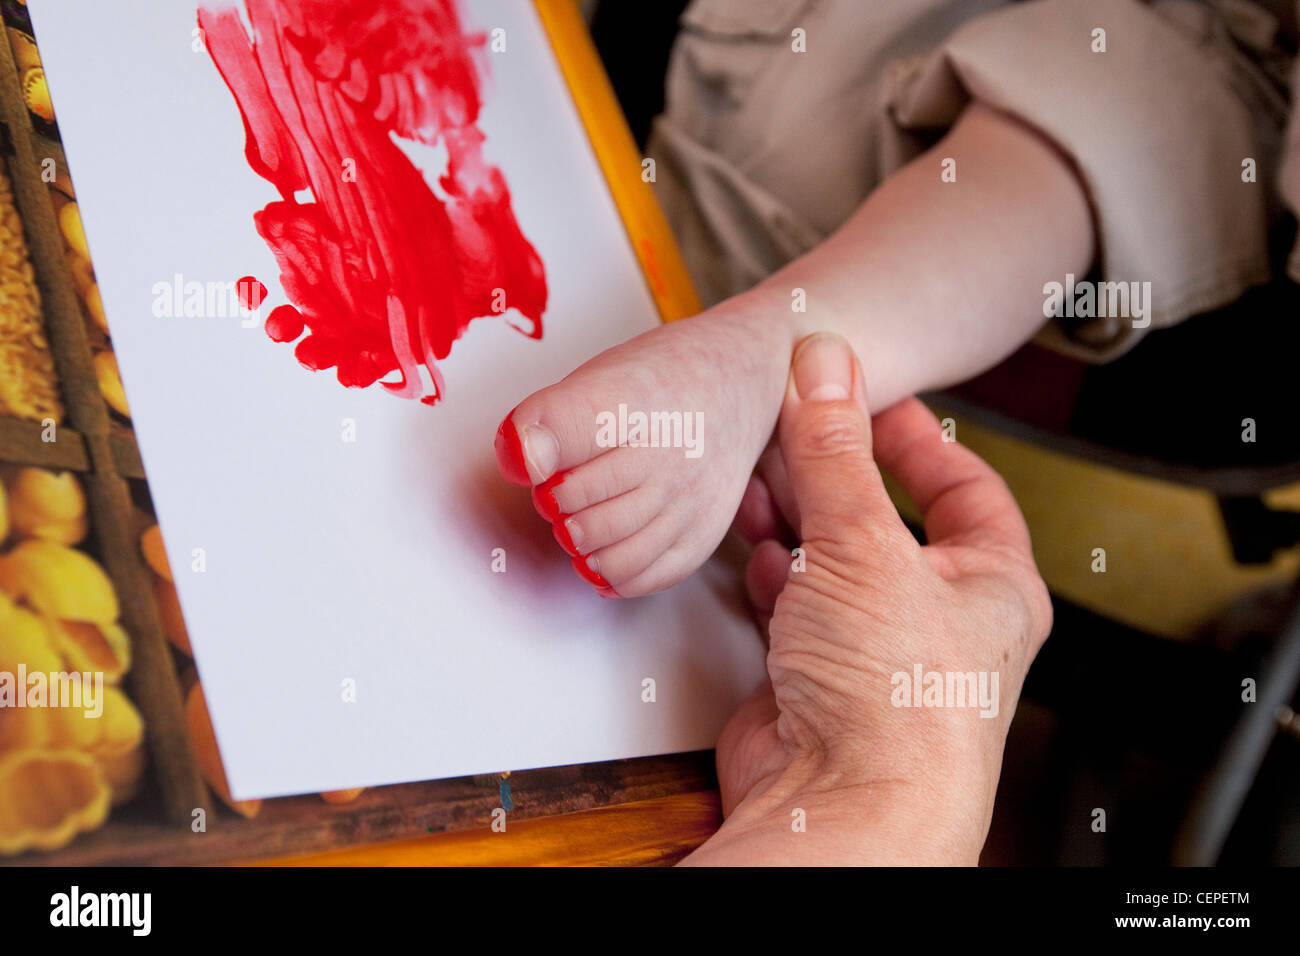 Child with learning disabilities using foot to paint a picture Stock Photo